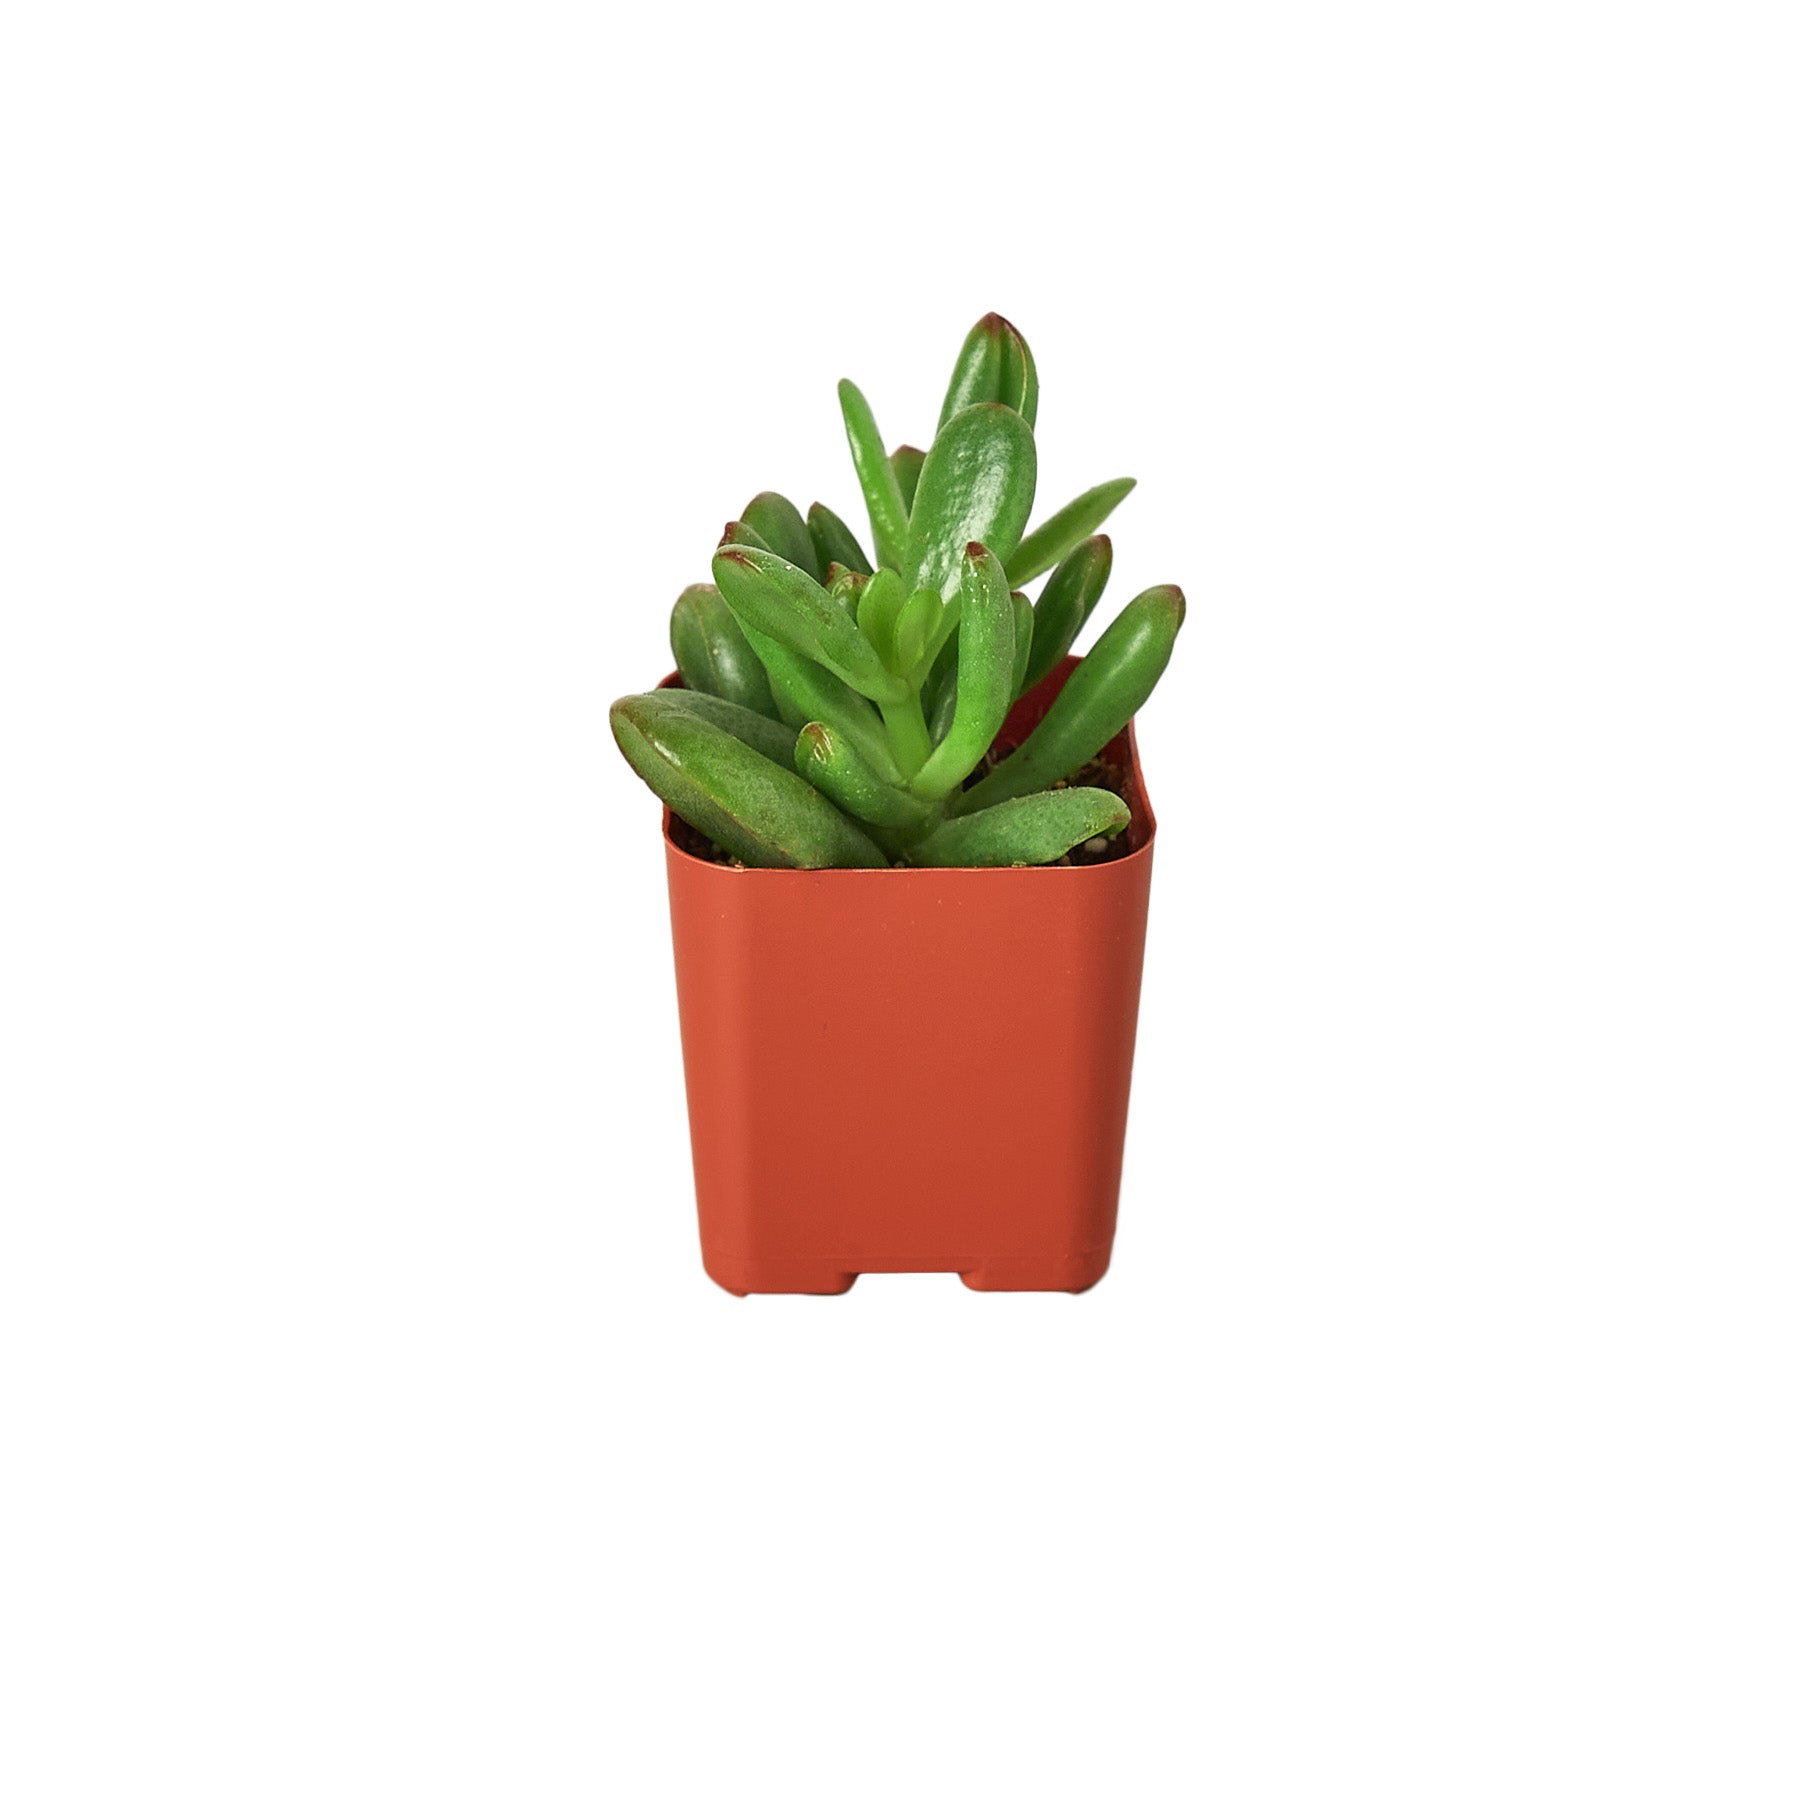 A small succulent plant in a red pot on a white background, available at the best plant nursery near me.